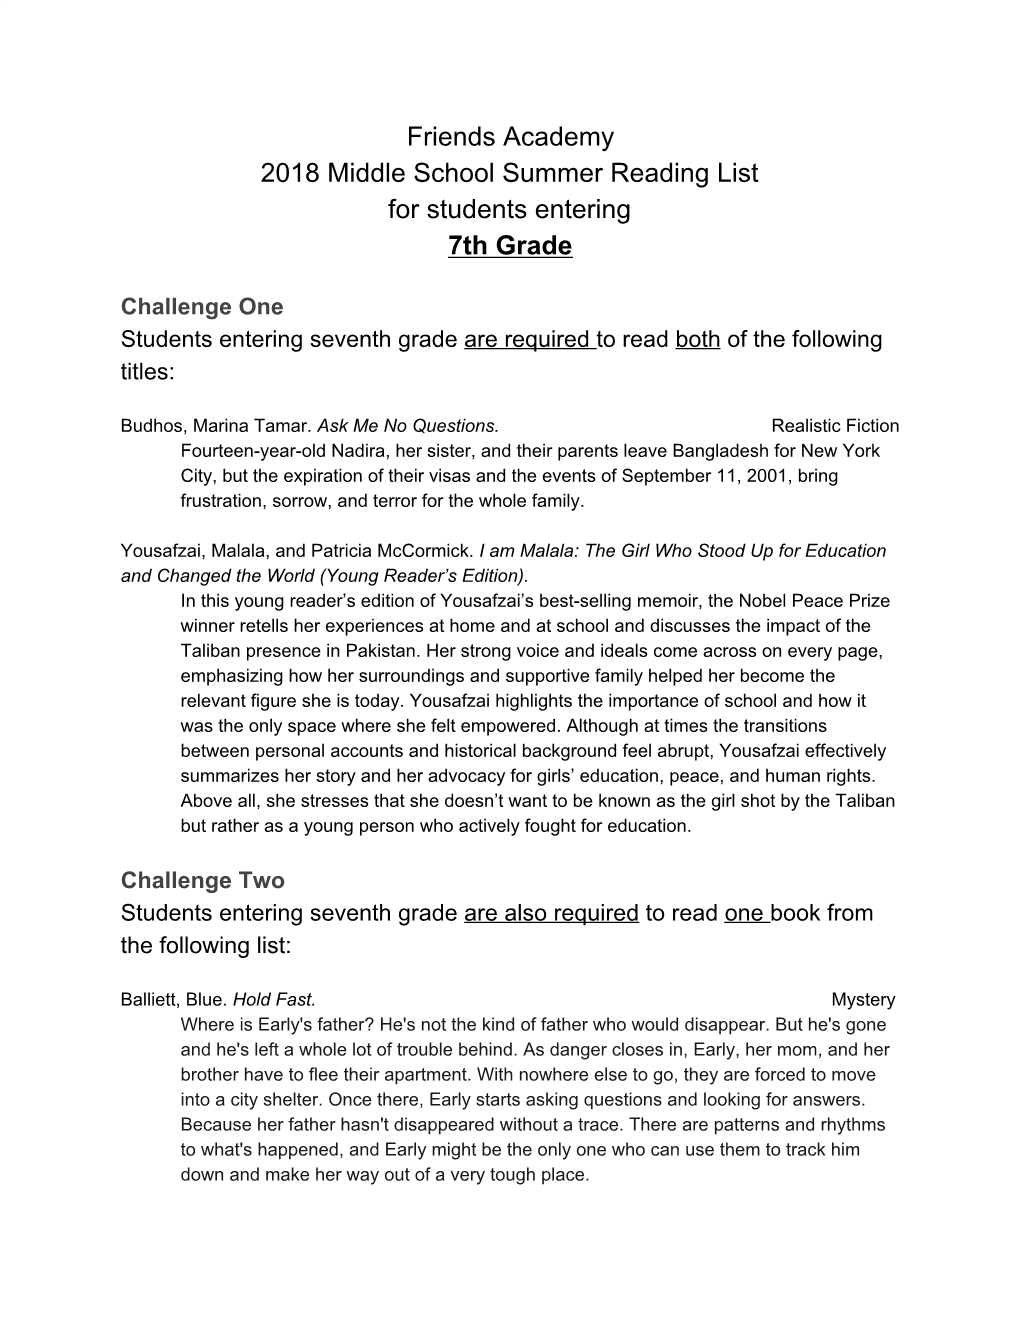 Friends Academy 2018 Middle School Summer Reading List for Students Entering 7Th Grade